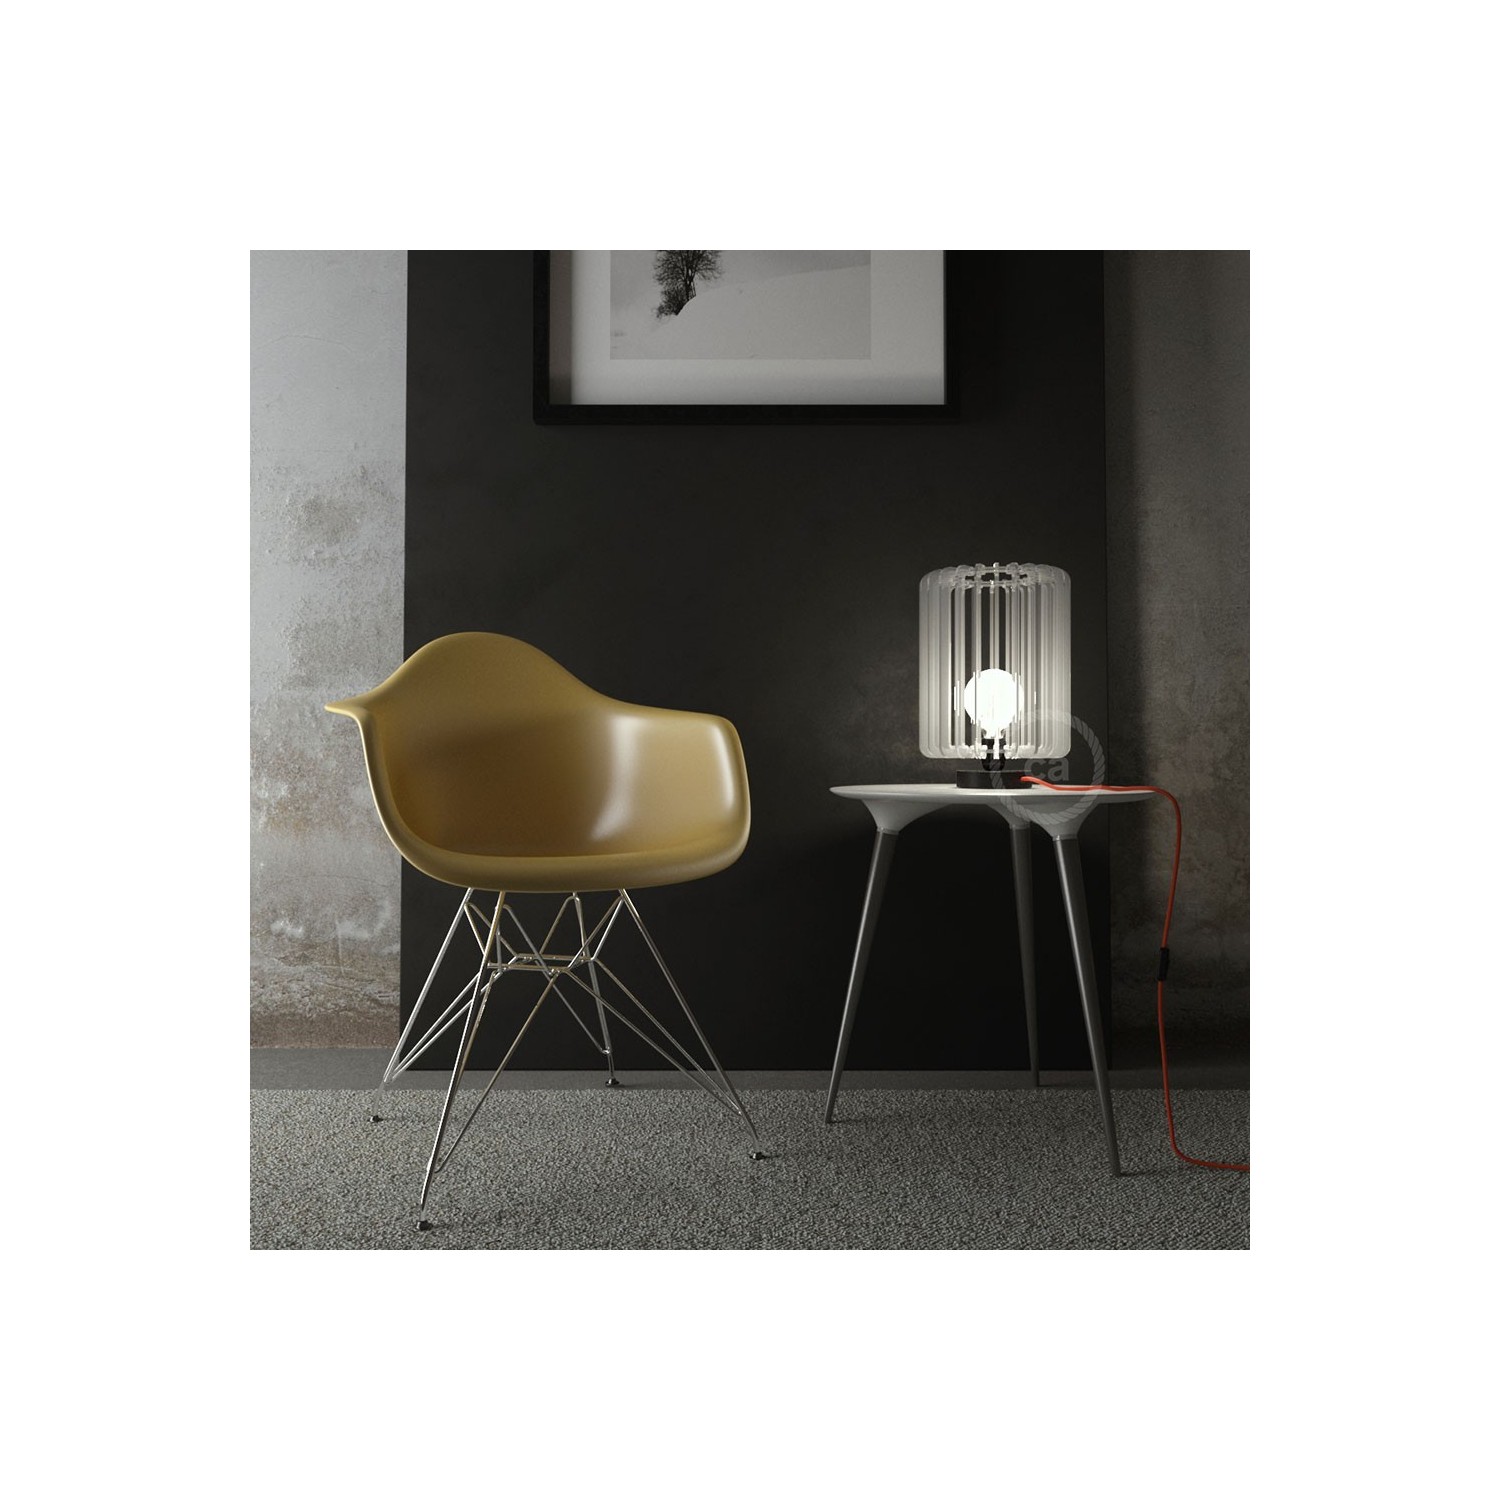 Posaluce, the black metal table lamp for lampshade, with textile cable, in-line switch and english plug